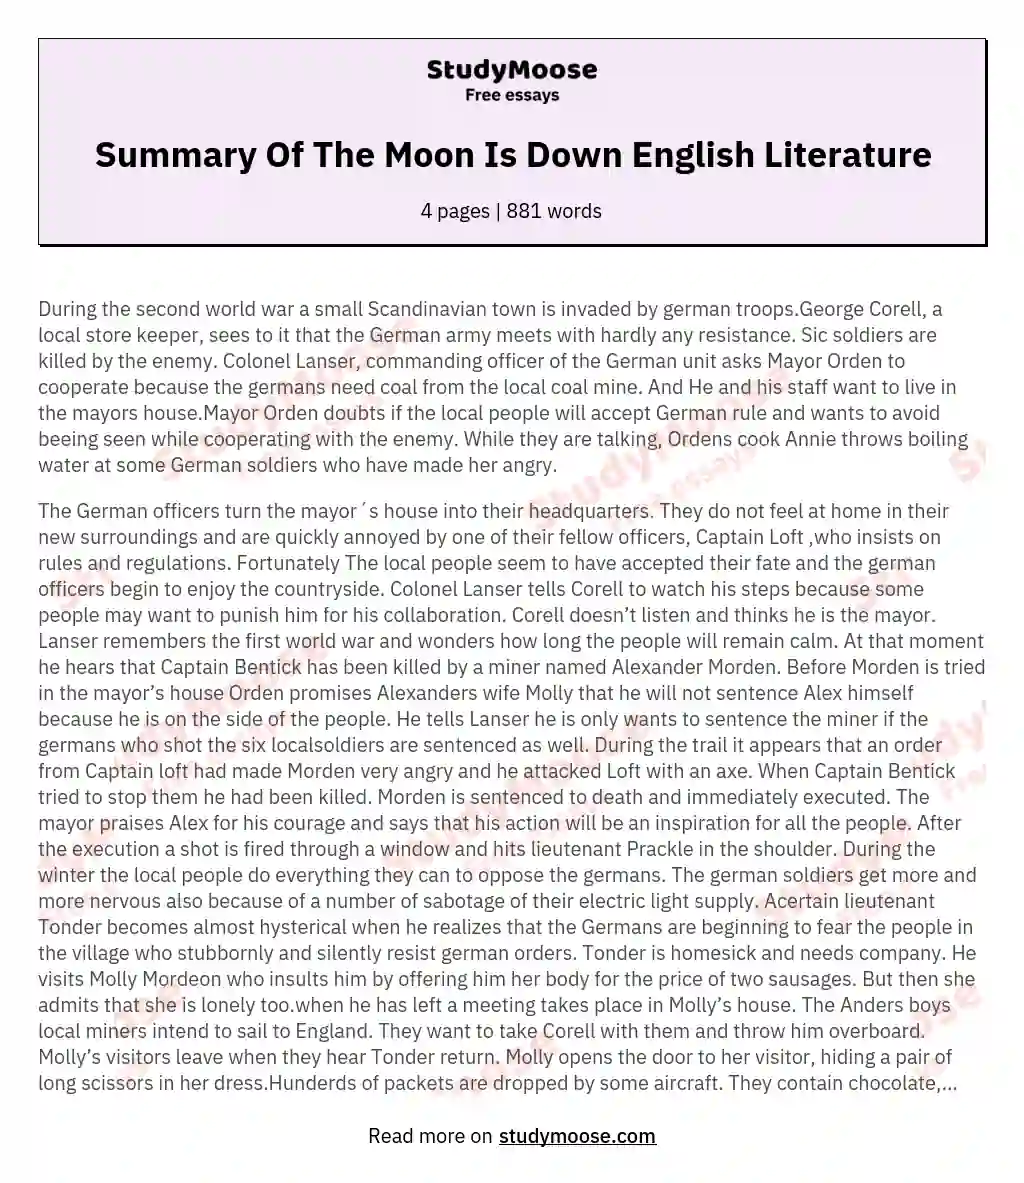 Summary Of The Moon Is Down English Literature essay